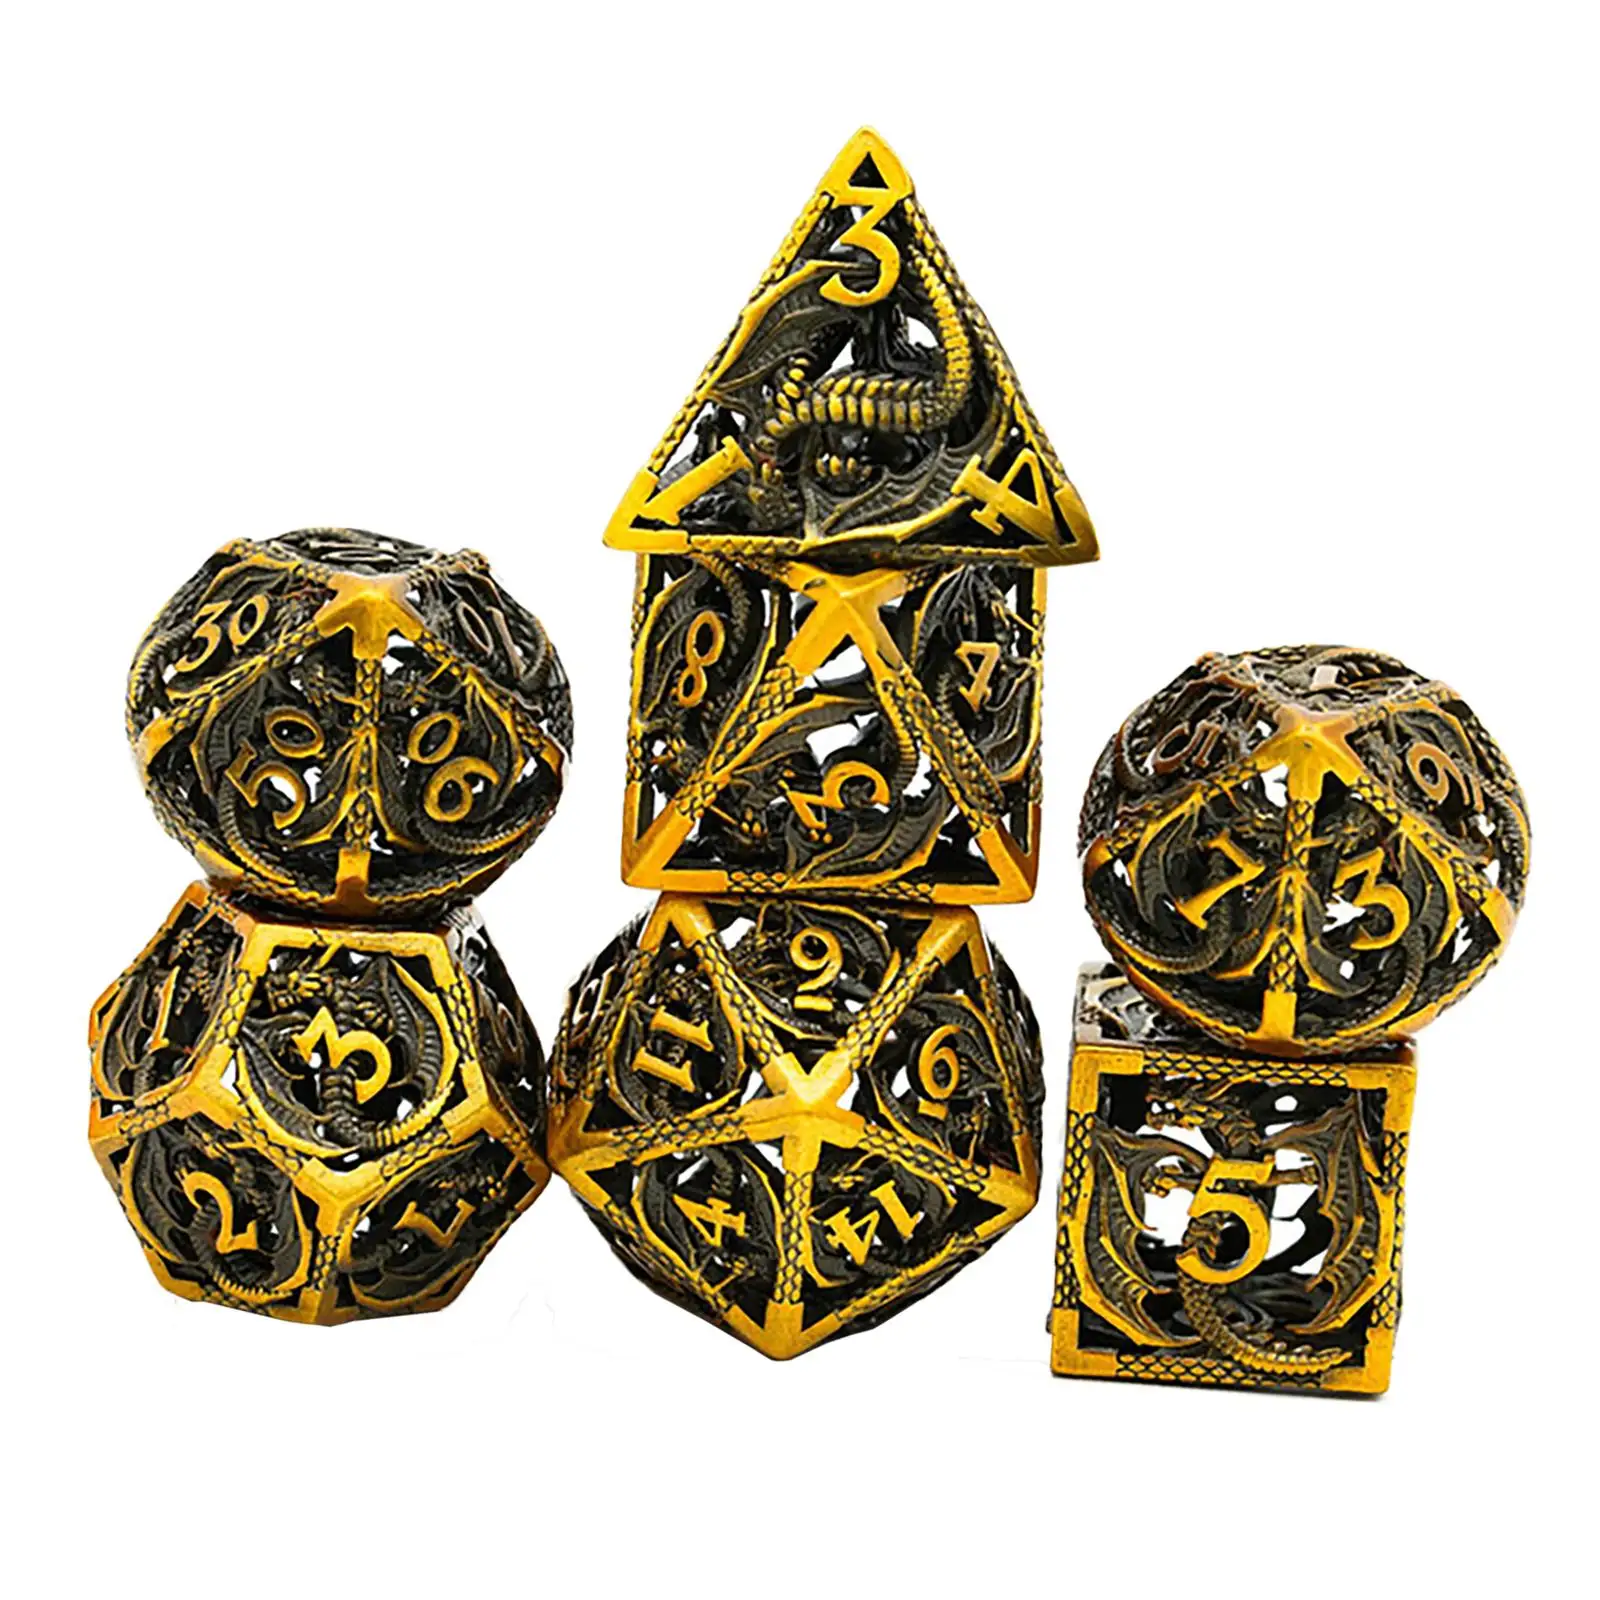 Hollow Metal Dice Set DND Polyhedral D&D Dragon Dice for Role Playing Games dice RPG Dragon Pattern-ancient